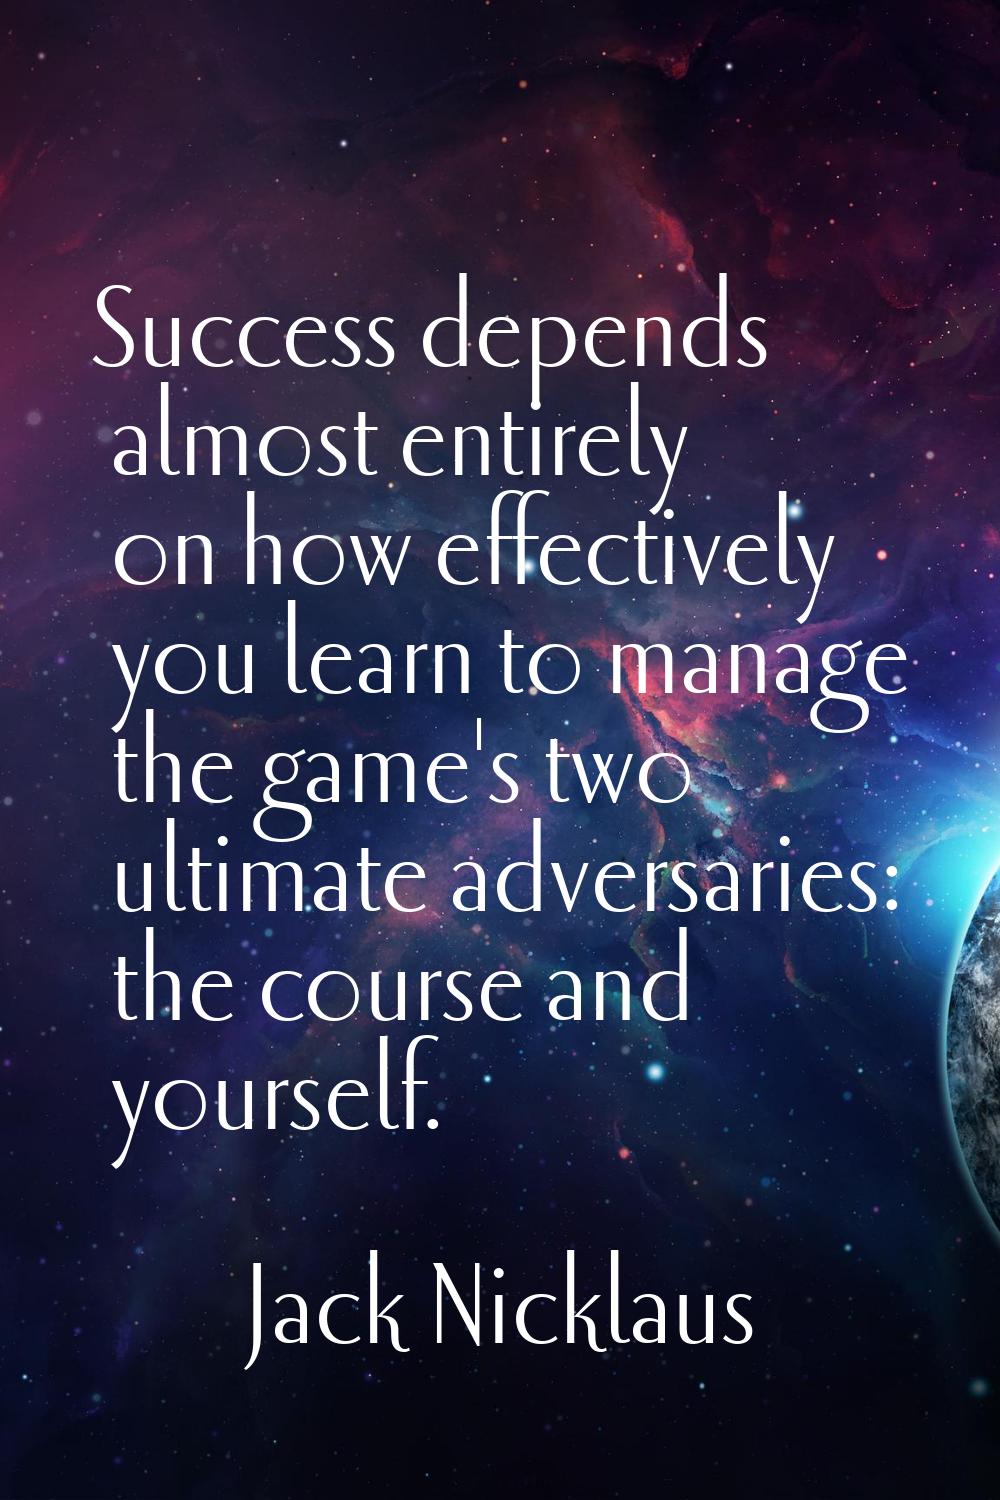 Success depends almost entirely on how effectively you learn to manage the game's two ultimate adve